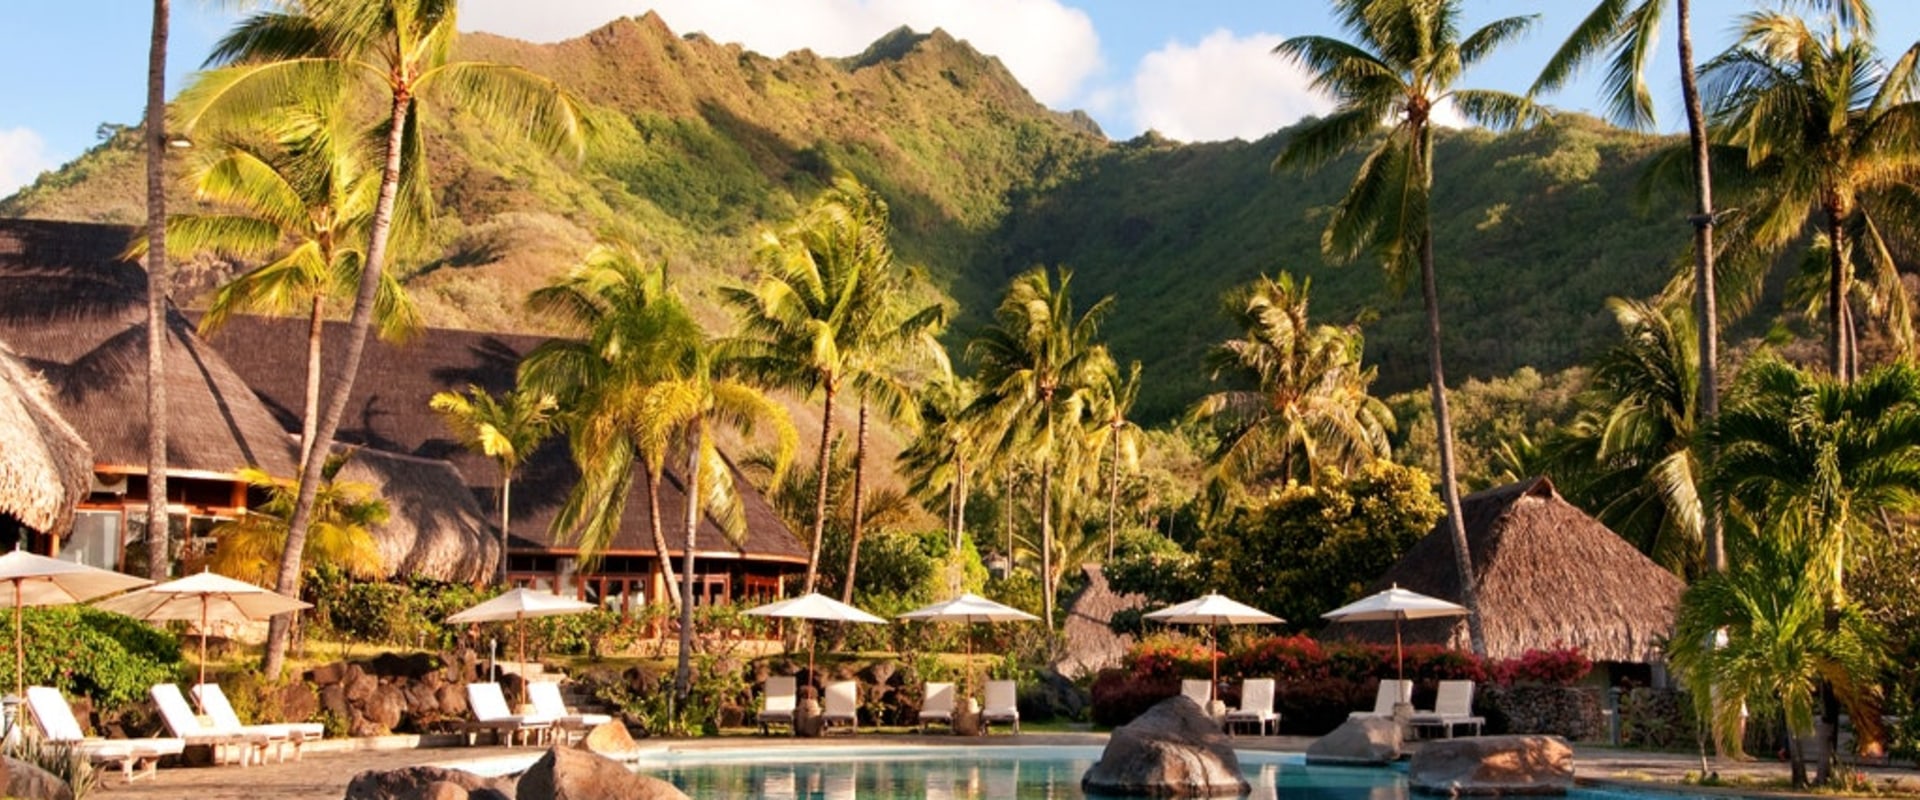 Discover the Best Beach Resorts for Your Next Vacation